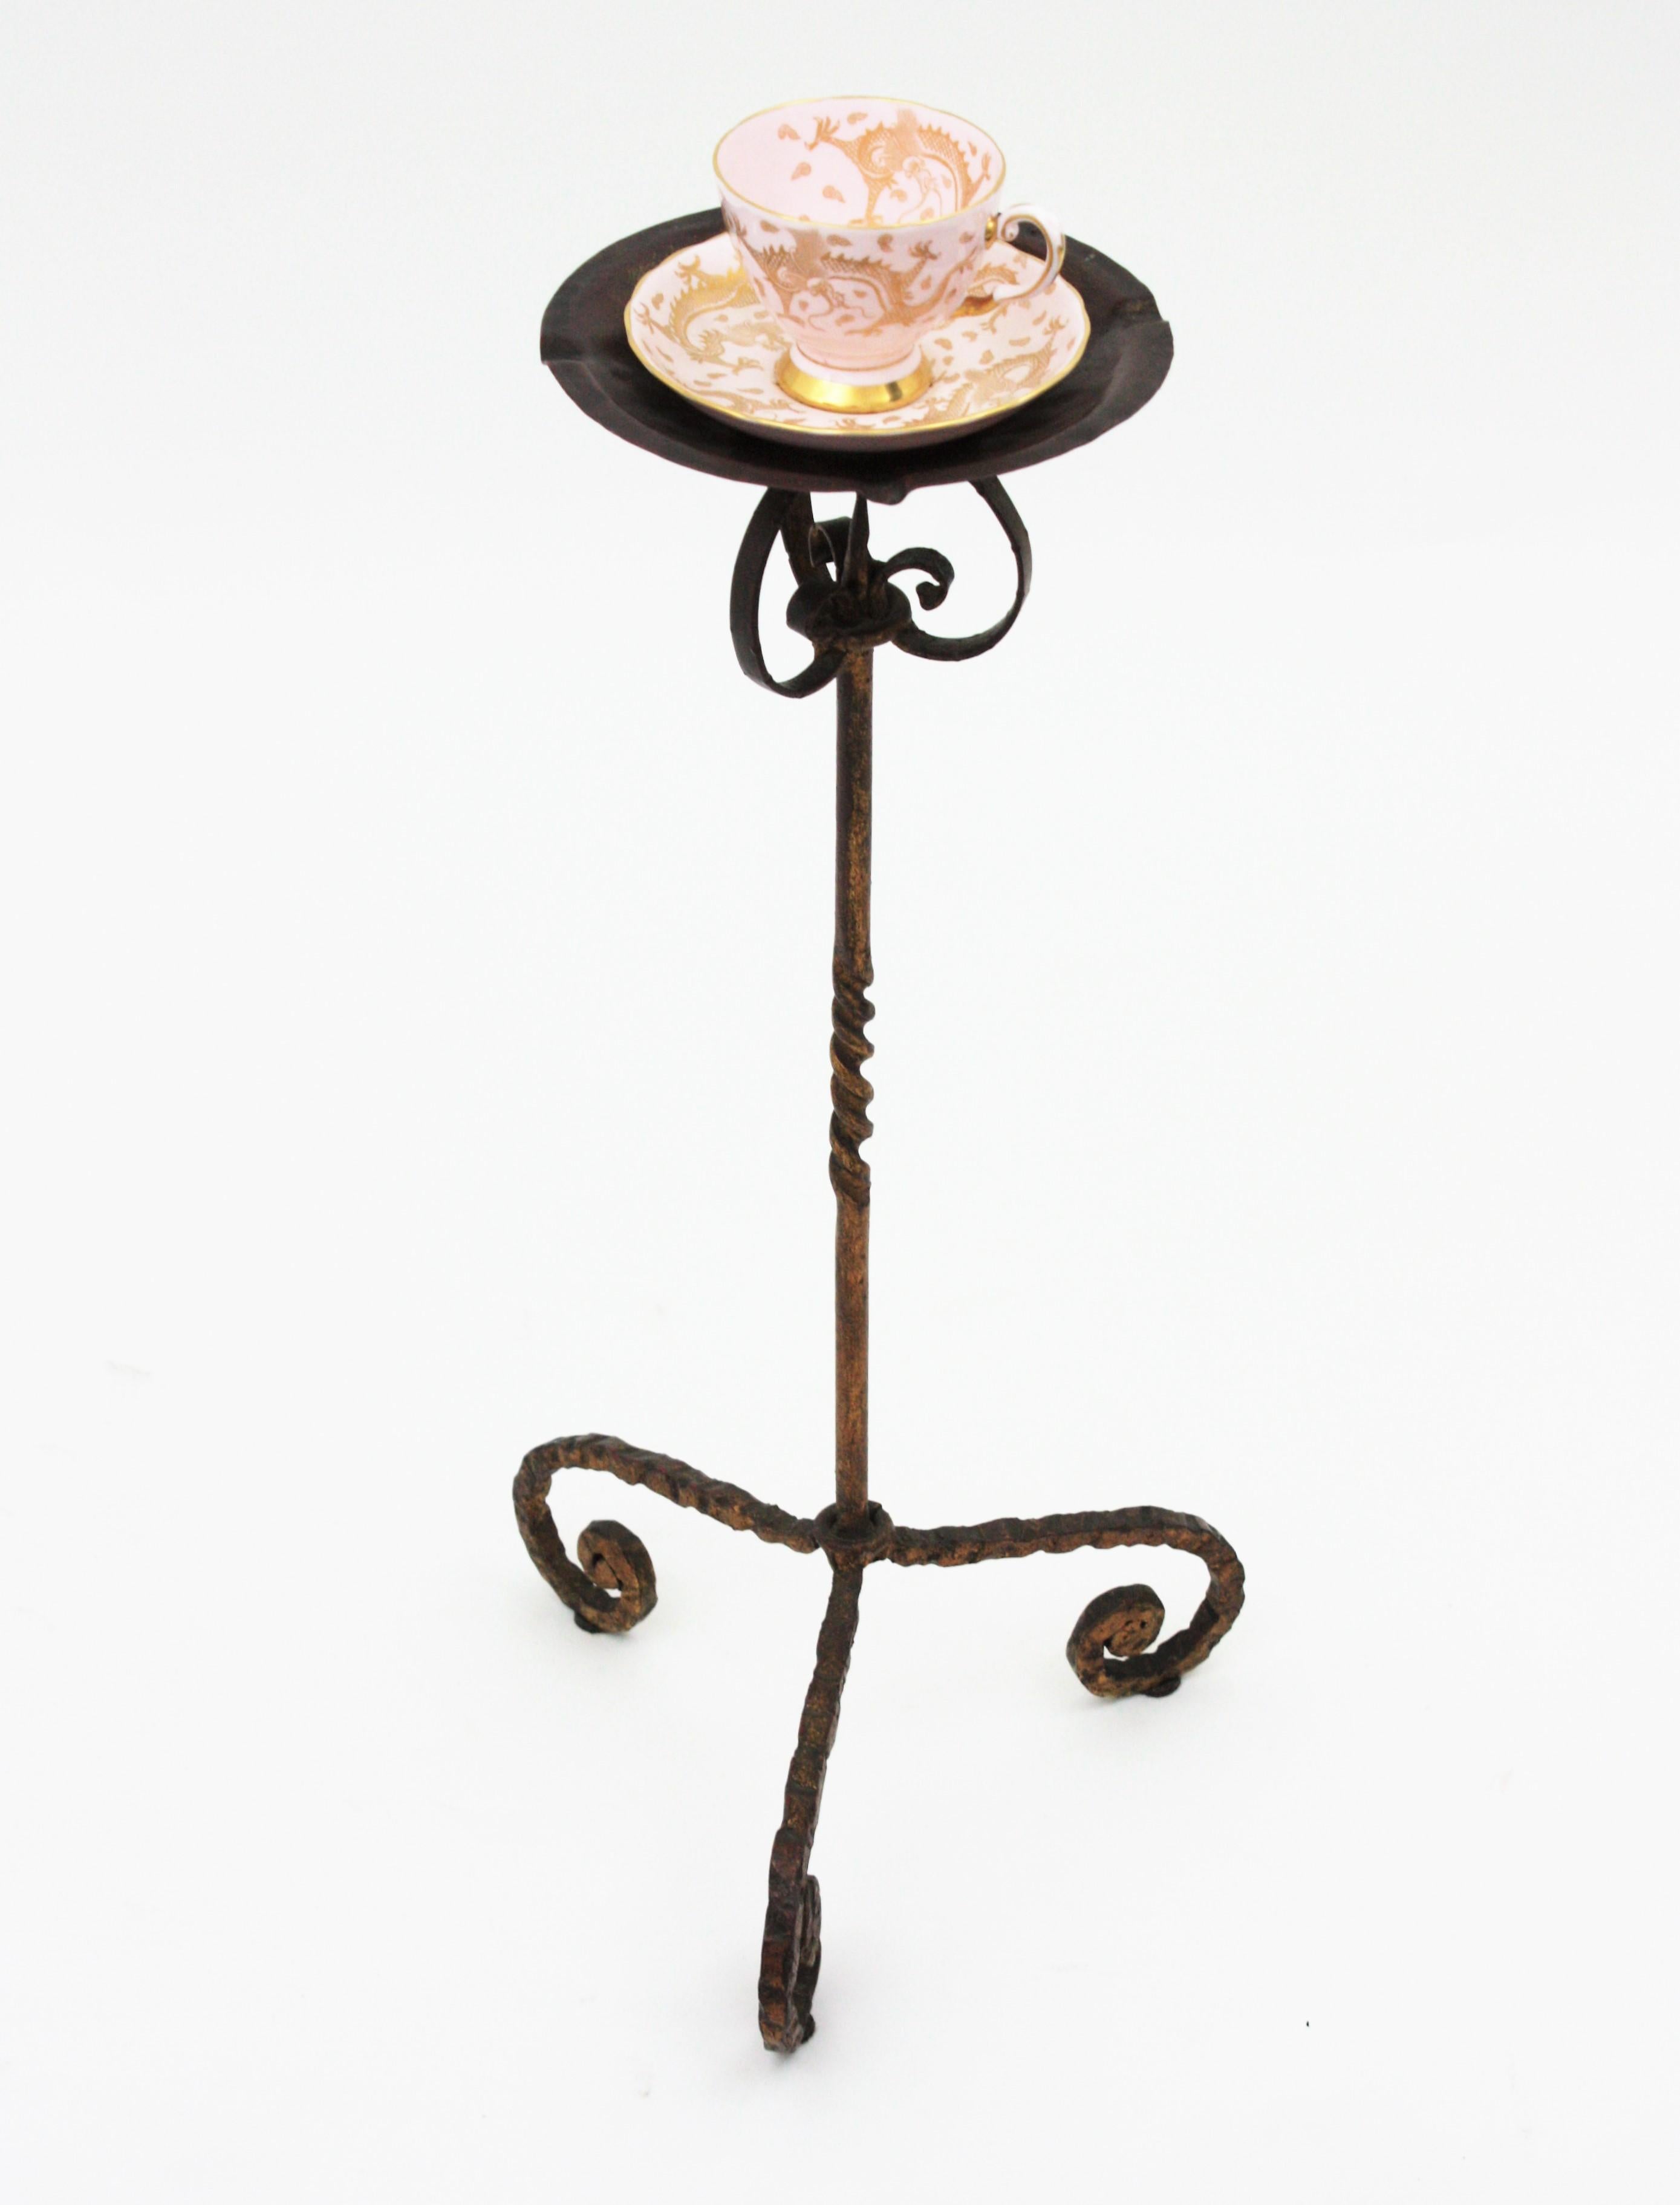 Hammered Spanish Drinks Table / Side Table / Floor Ashtray, Wrought Iron, 1940s For Sale